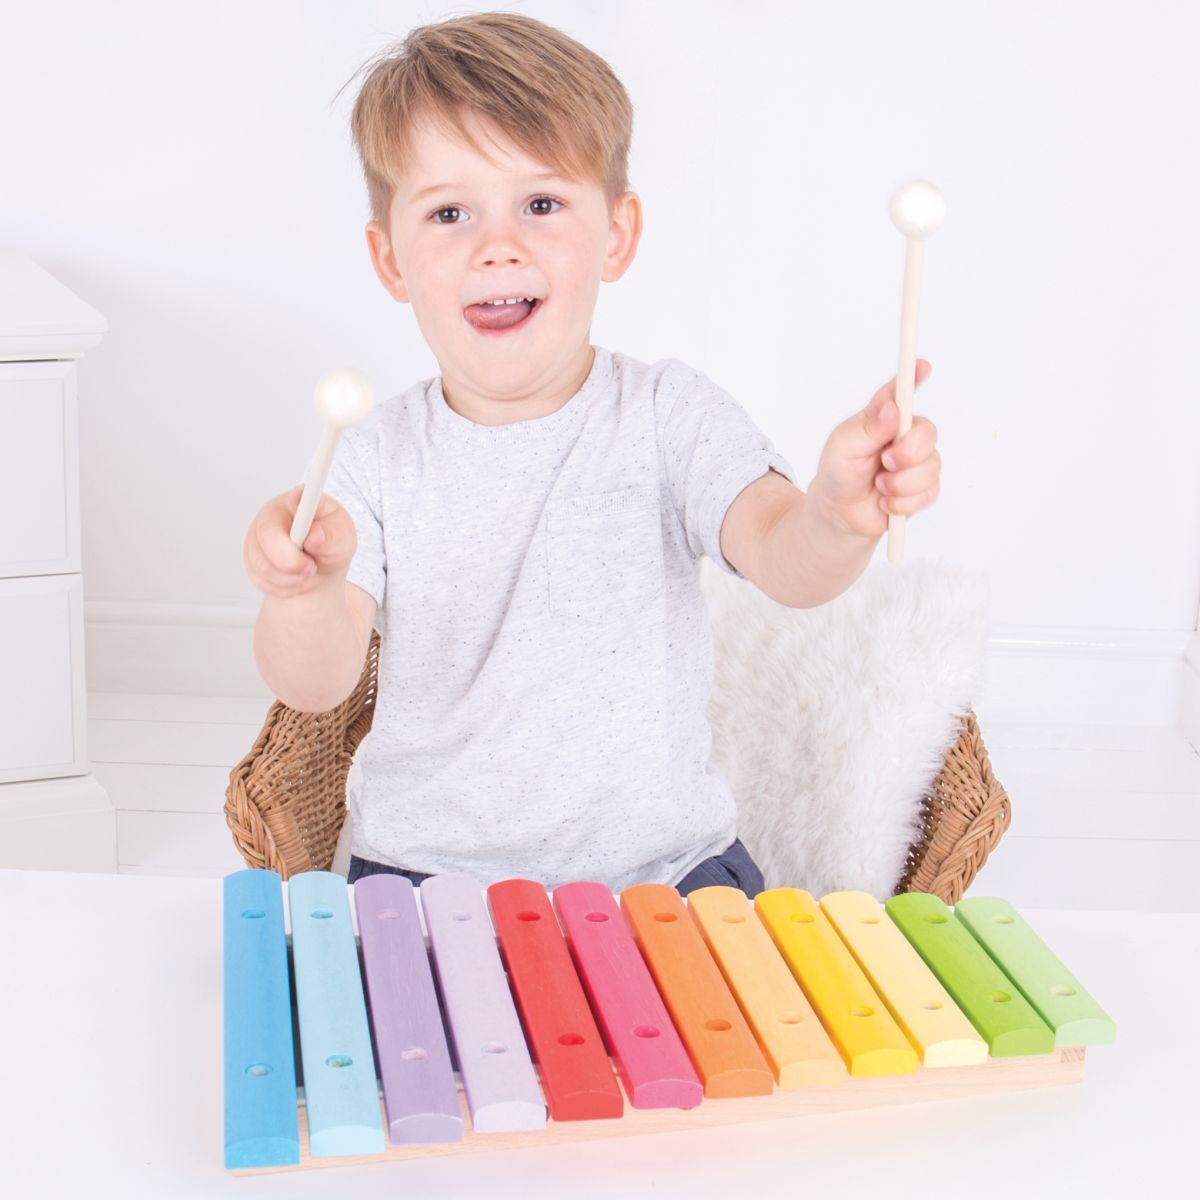 Snazzy Xylophone